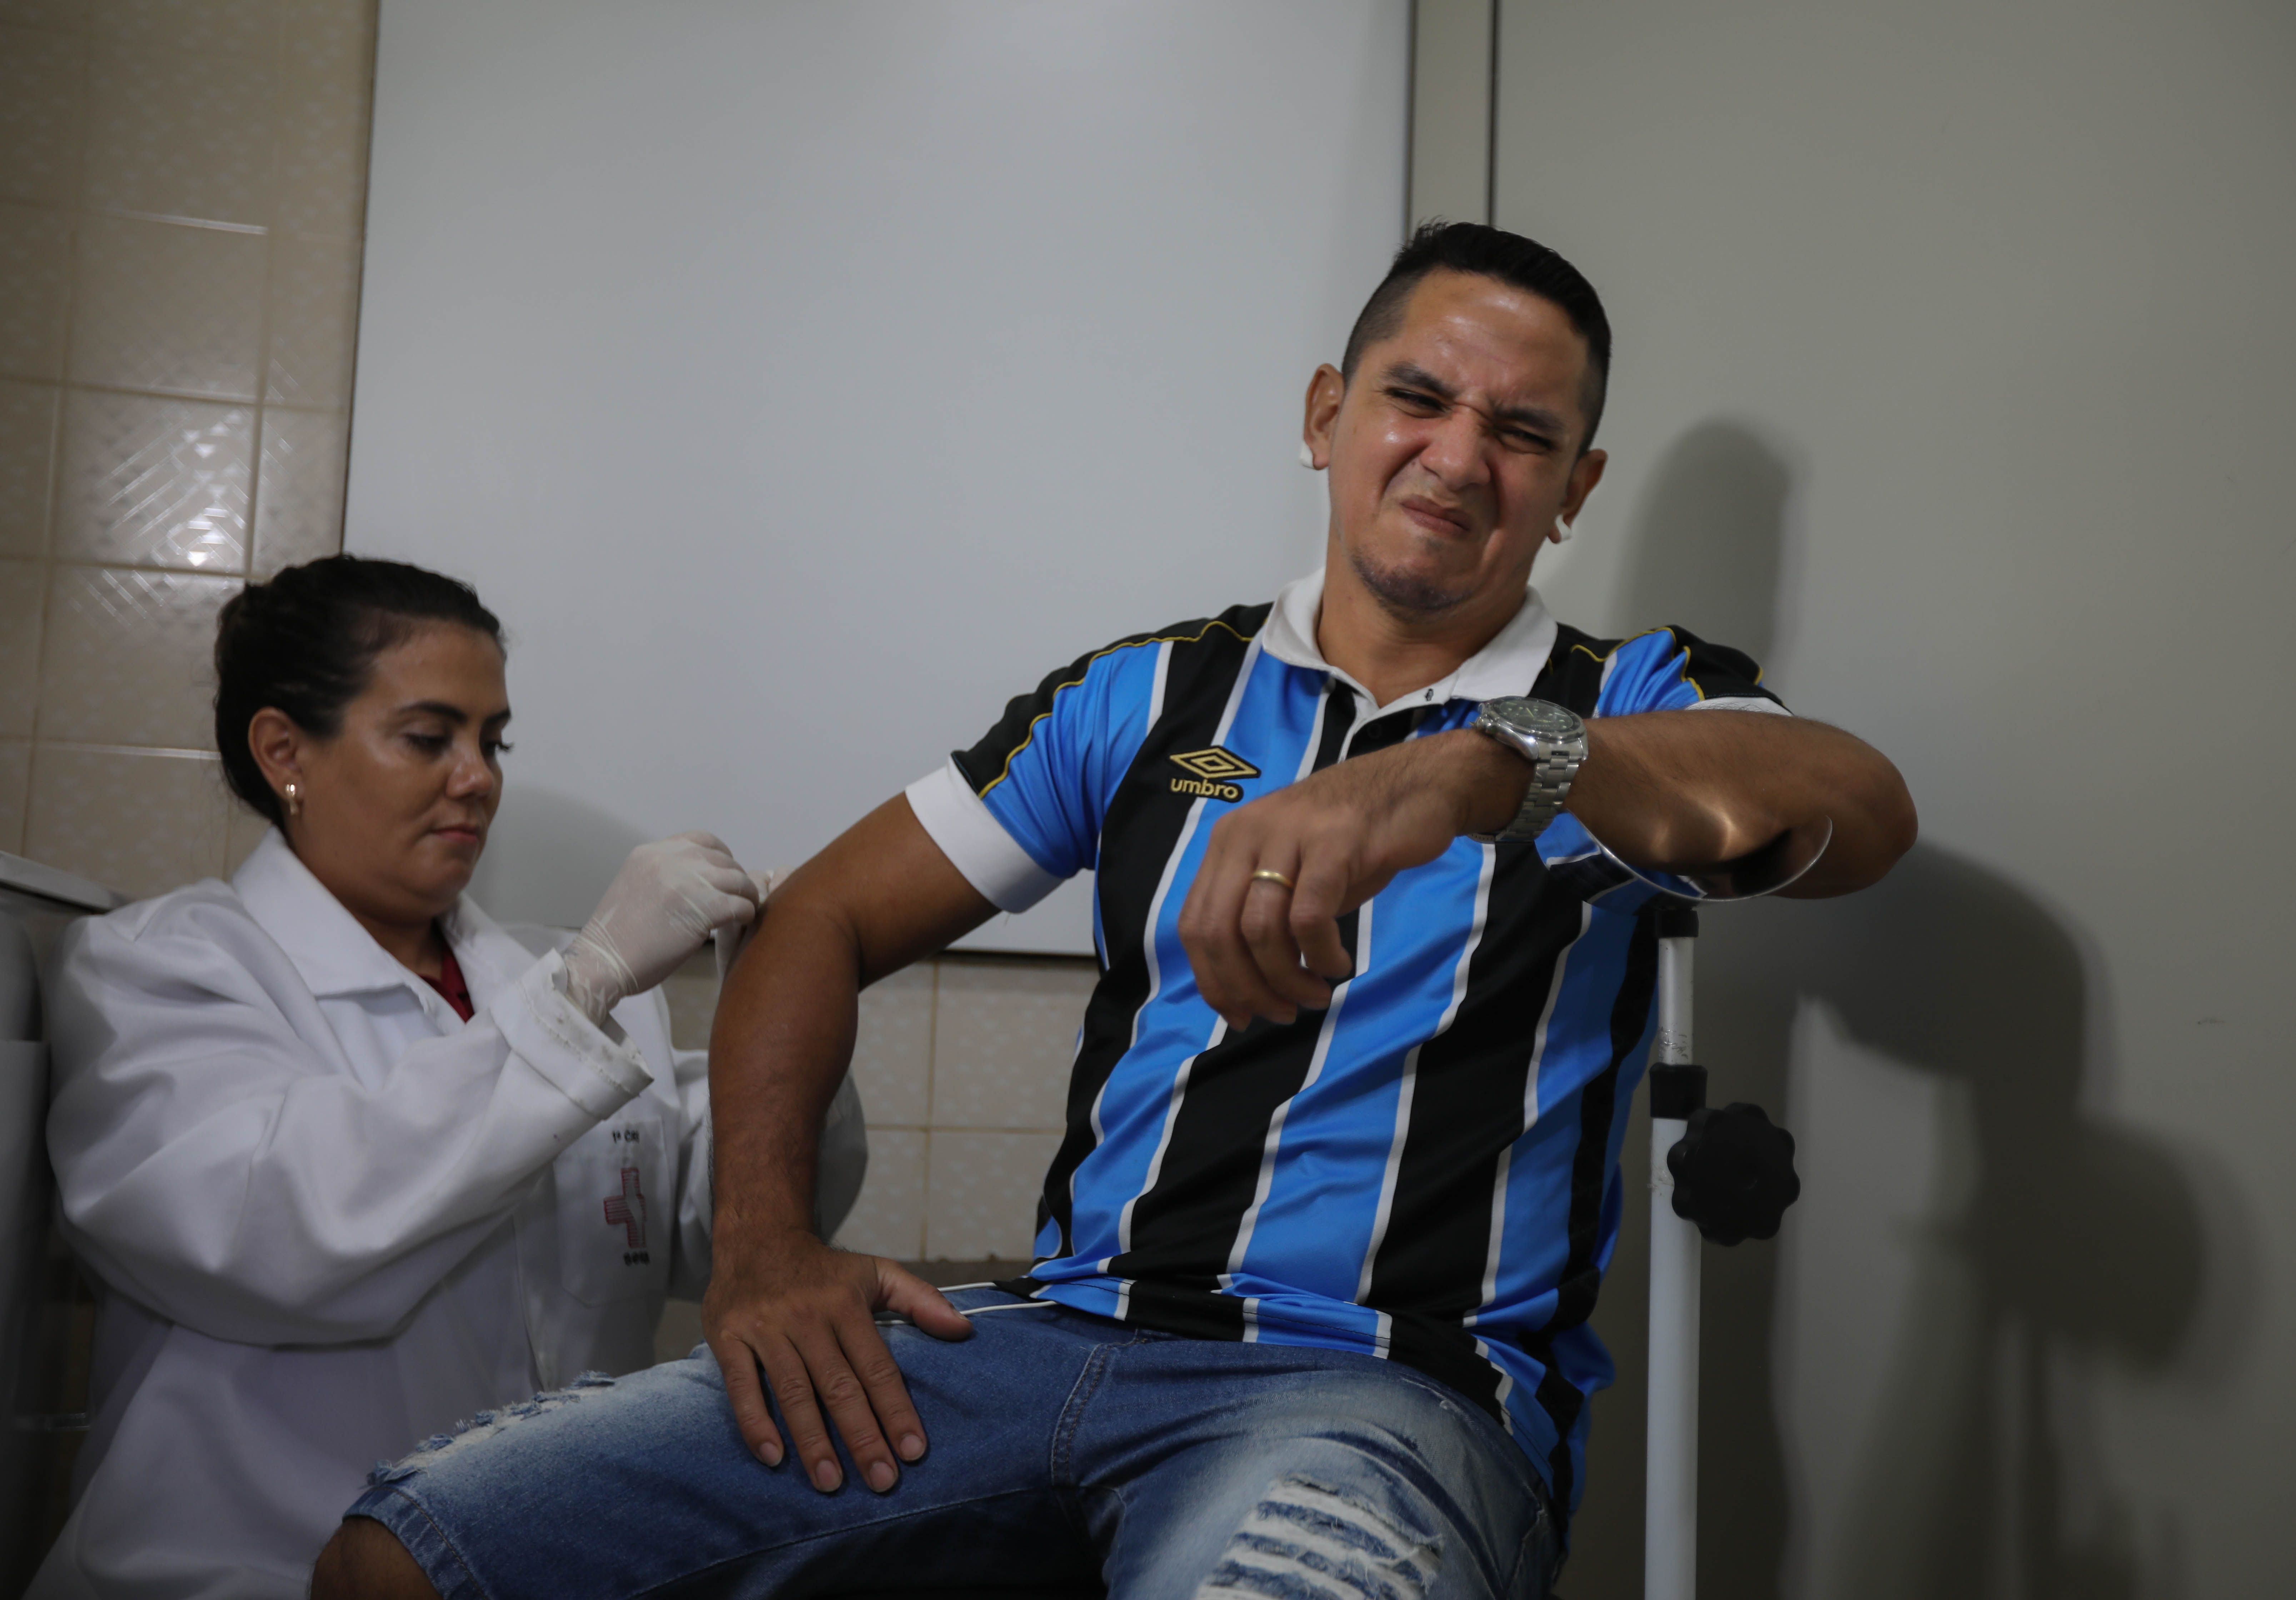 Fernando Macedo, 40, grimaces as Erika Jorge, a member of the Laboratory of Dermatology-Immunology, takes skin samples from his elbow during his Slit-skin smear examination. Image by Anton L. Delgado. Brazil, 2020.